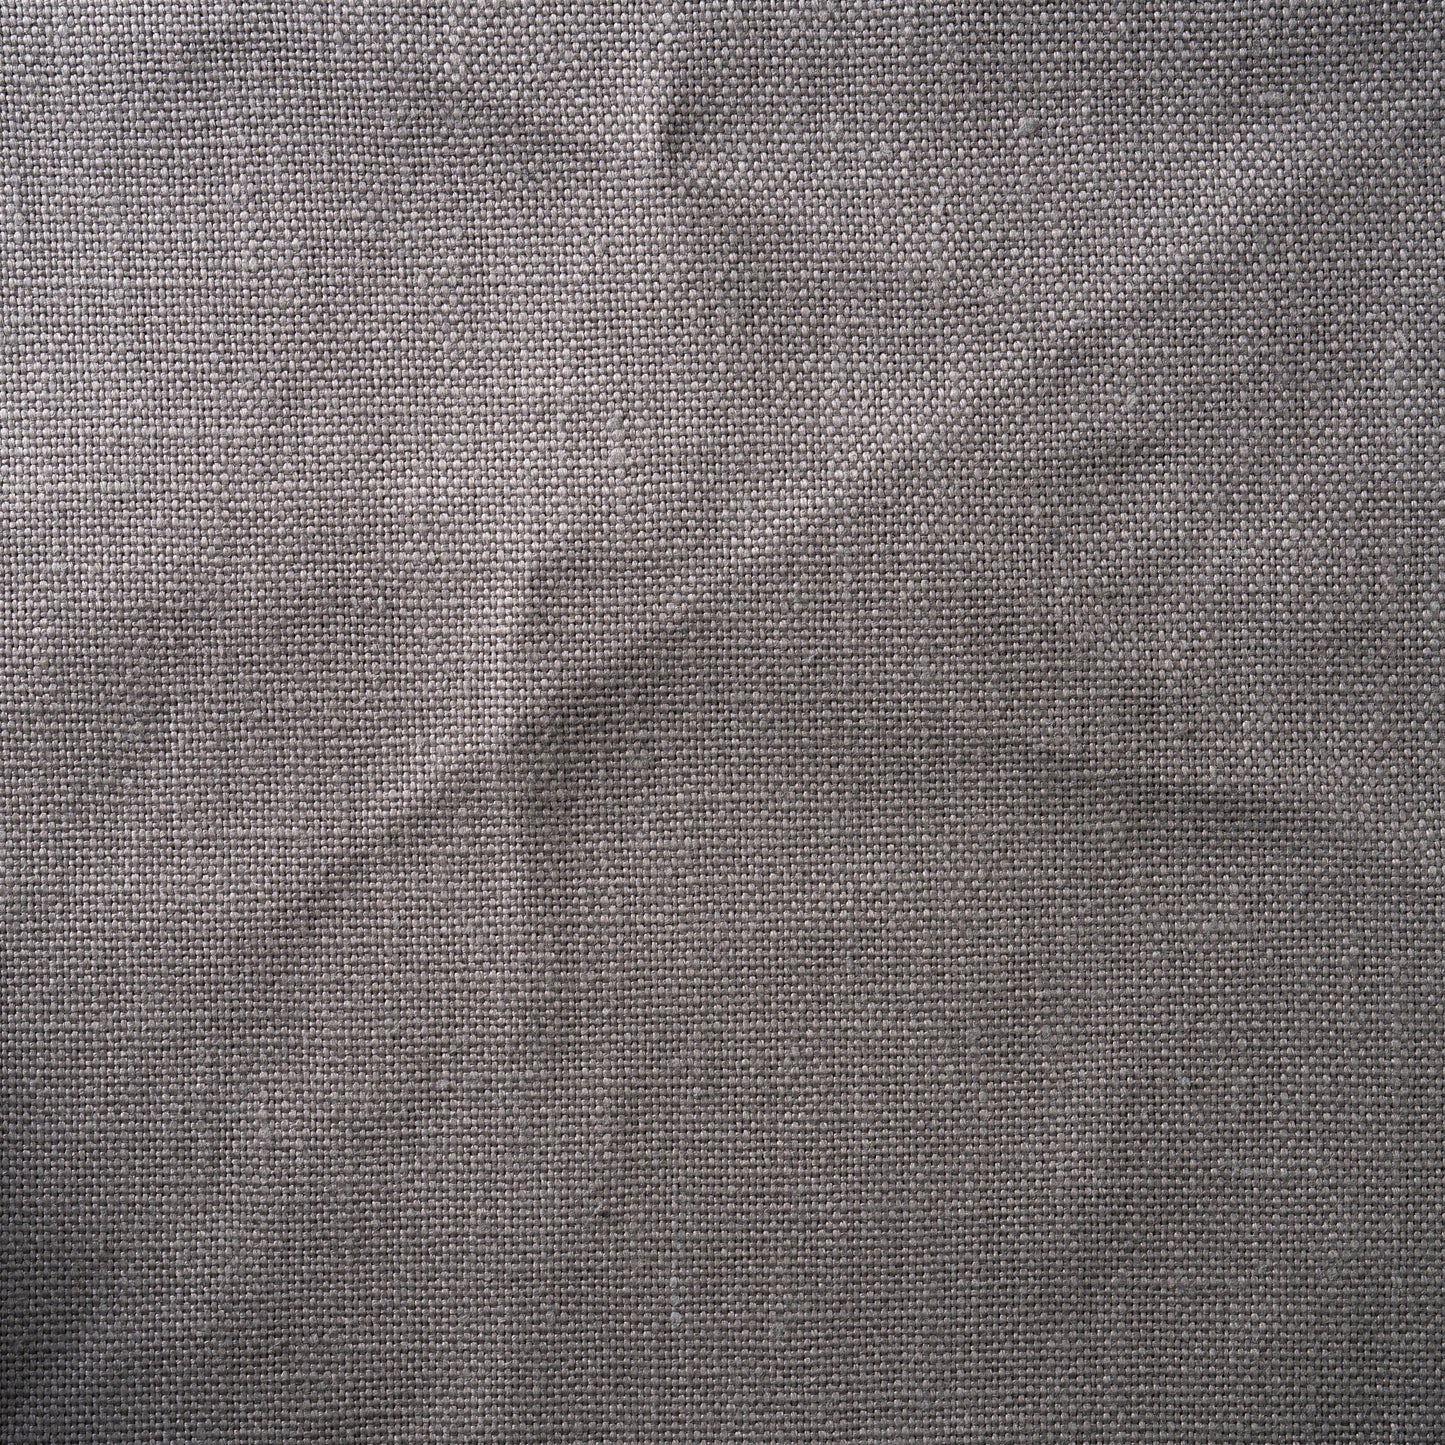 12 oz/sq yard 100% Upholstery/ Slipcover Weight Linen Pewter Swatch